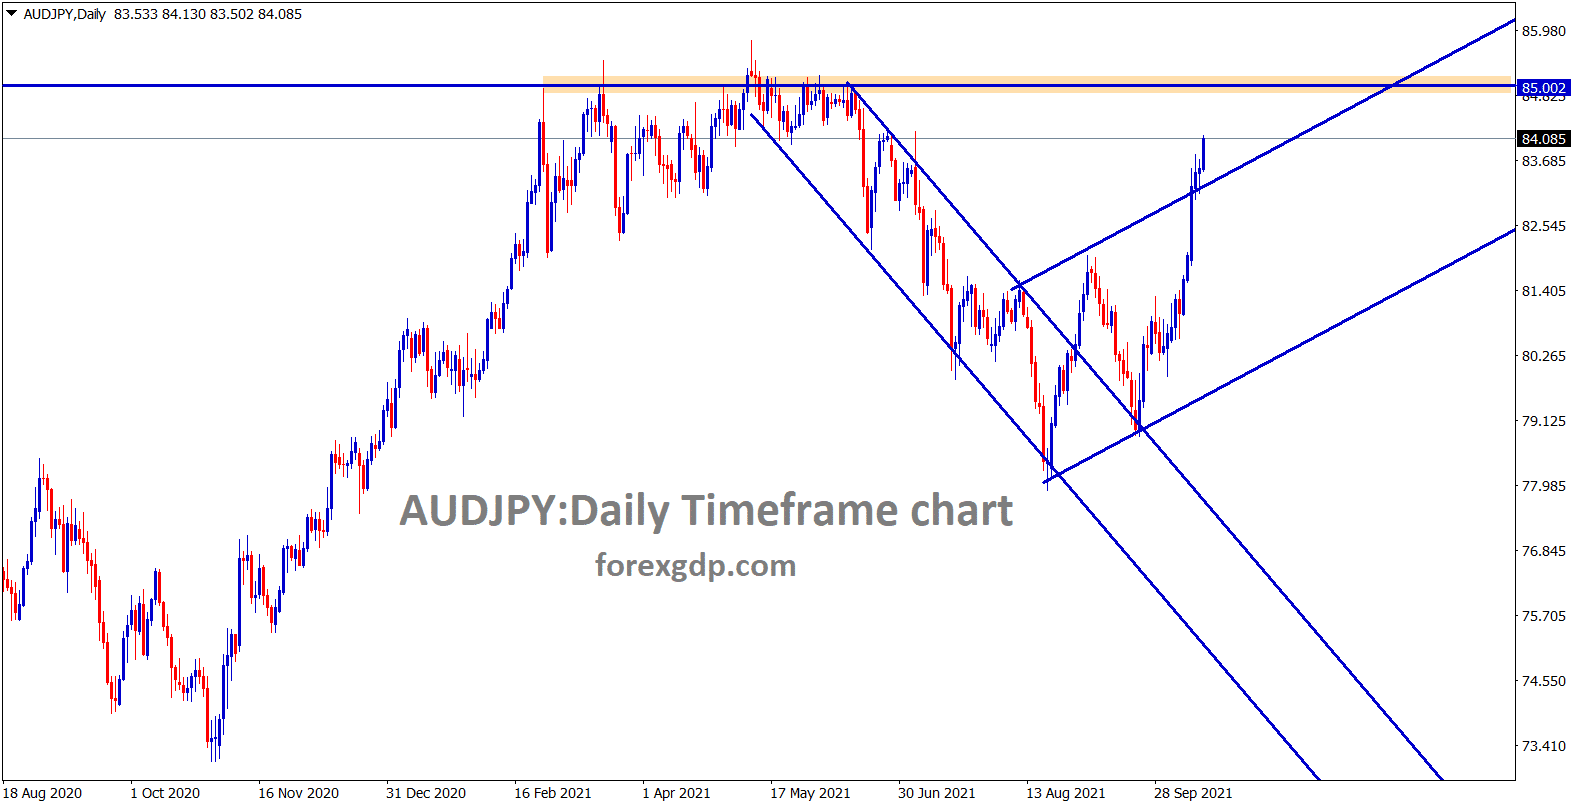 AUDJPY is moving up stronger after breaking the channel line